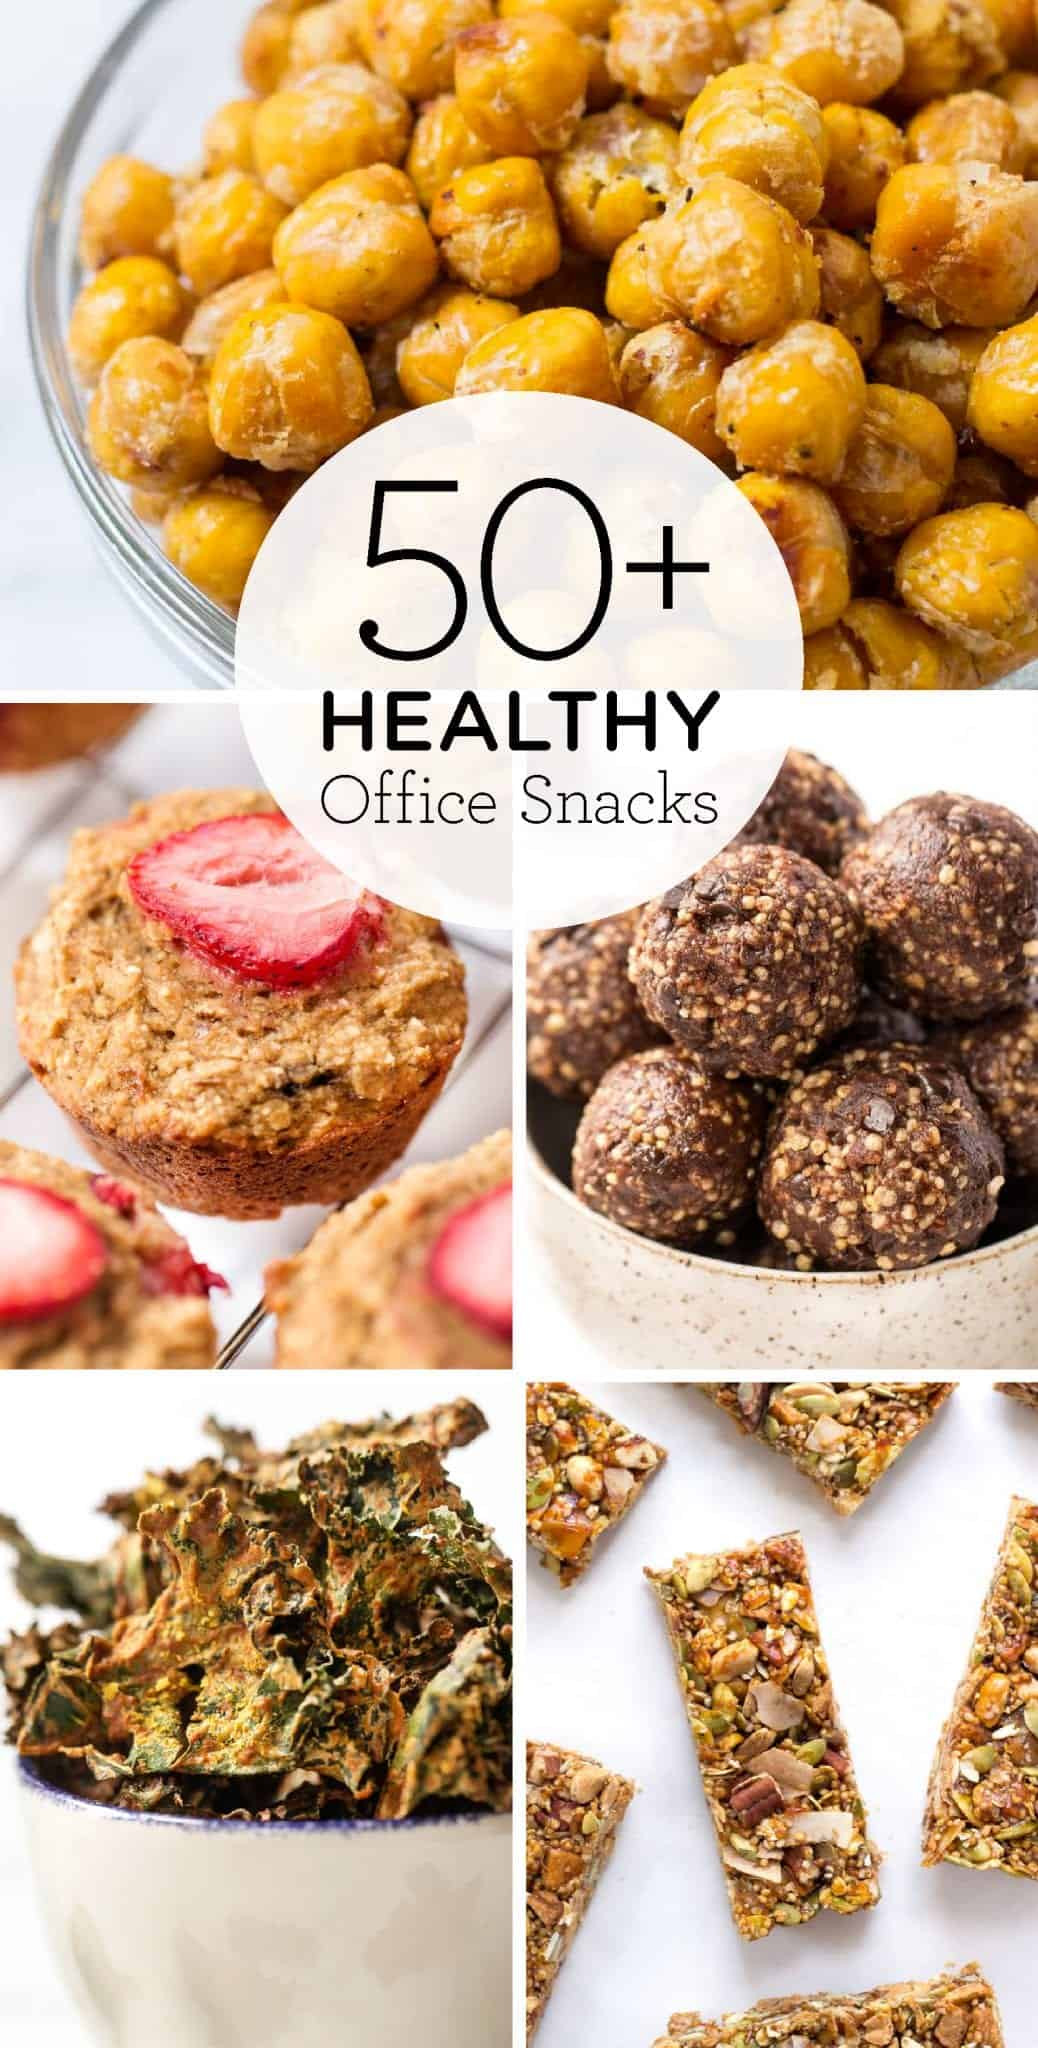 Top Healthy Snacks
 The 50 Best Healthy fice Snacks The Planet Simply